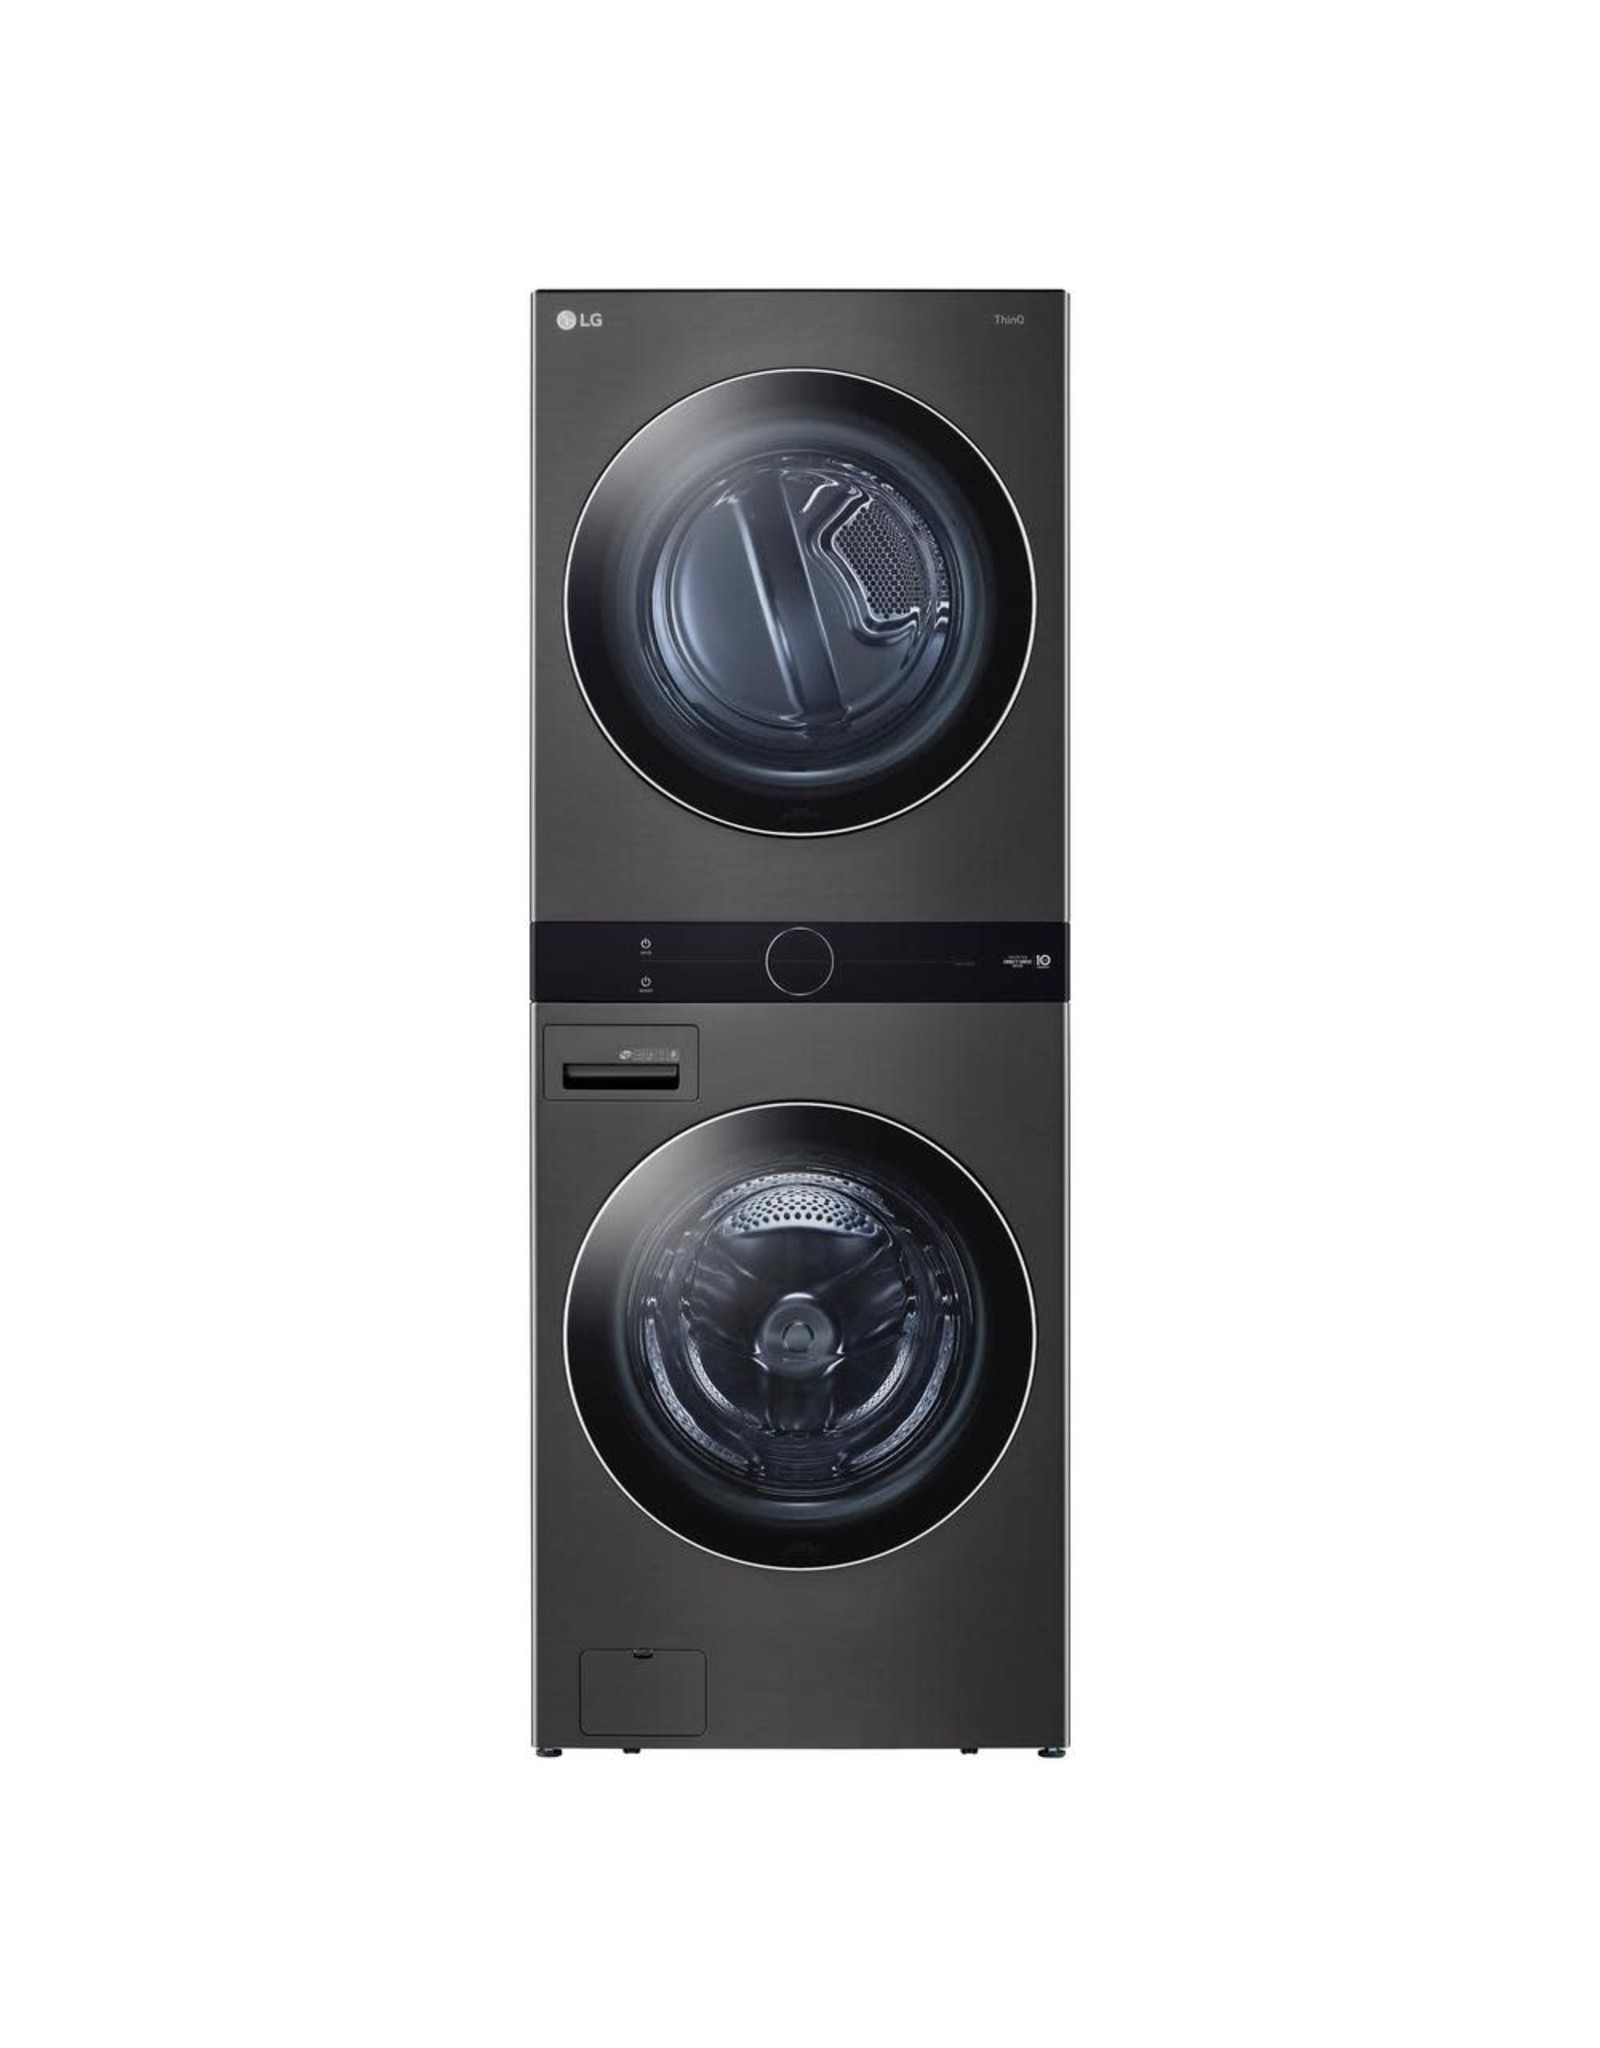 WKEX200HBA 27 in. Black Steel WashTower Laundry Center with 4.5 cu. ft. Front Load Washer and 7.4 cu. ft. Electric Dryer